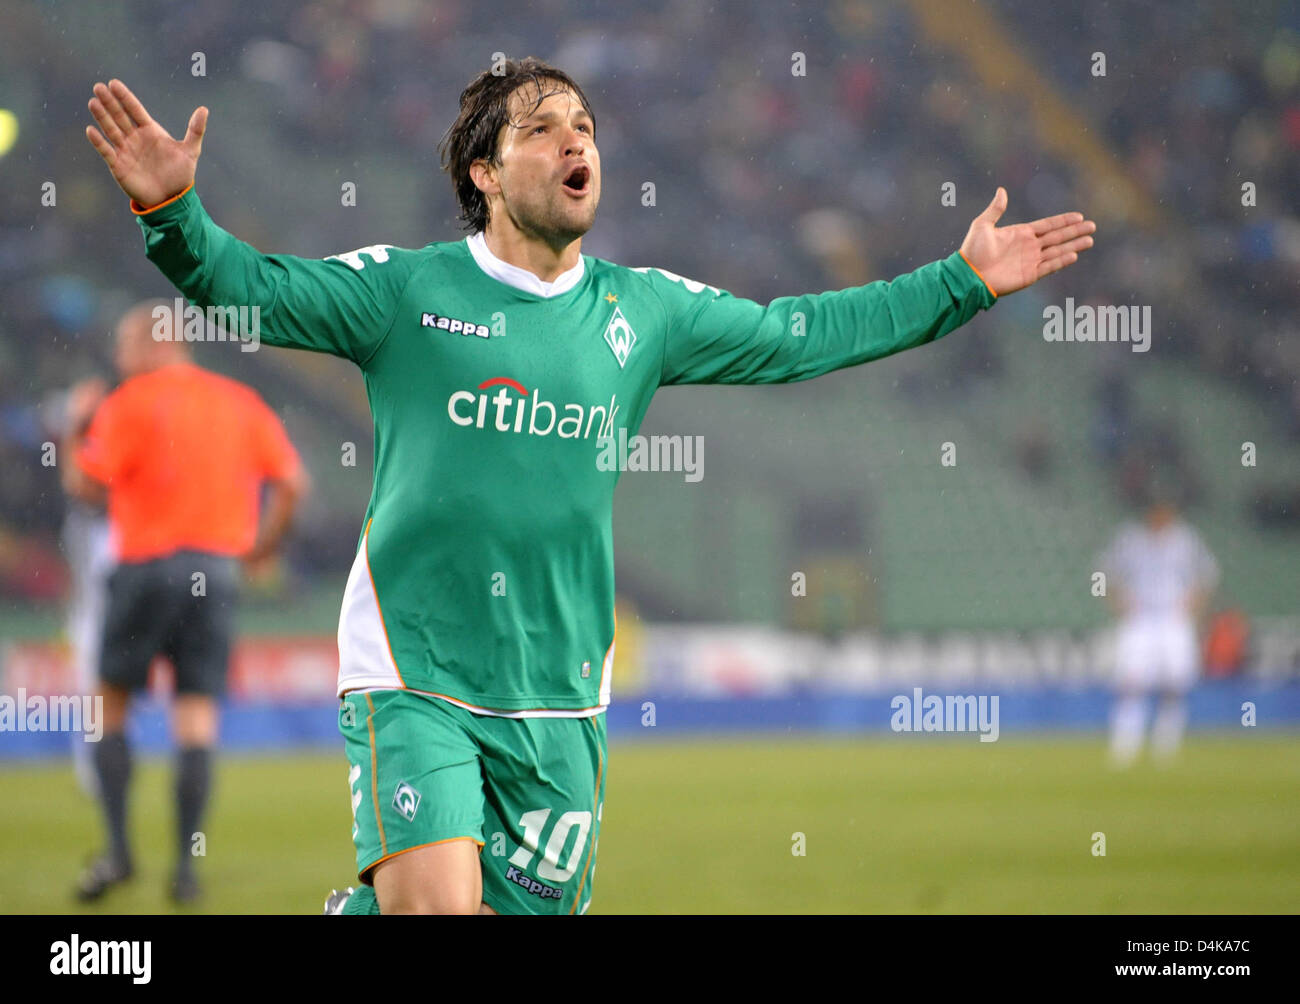 Bremen?s Diego cheers after his goal to 1-1 during the UEFA Cup quarter finals second leg match Udinese vs Werder Bremen at Stadio Friuli in Udine, Italy, 16 April 2009. The match tied 3-3. Photo: Carmen Jaspersen Stock Photo